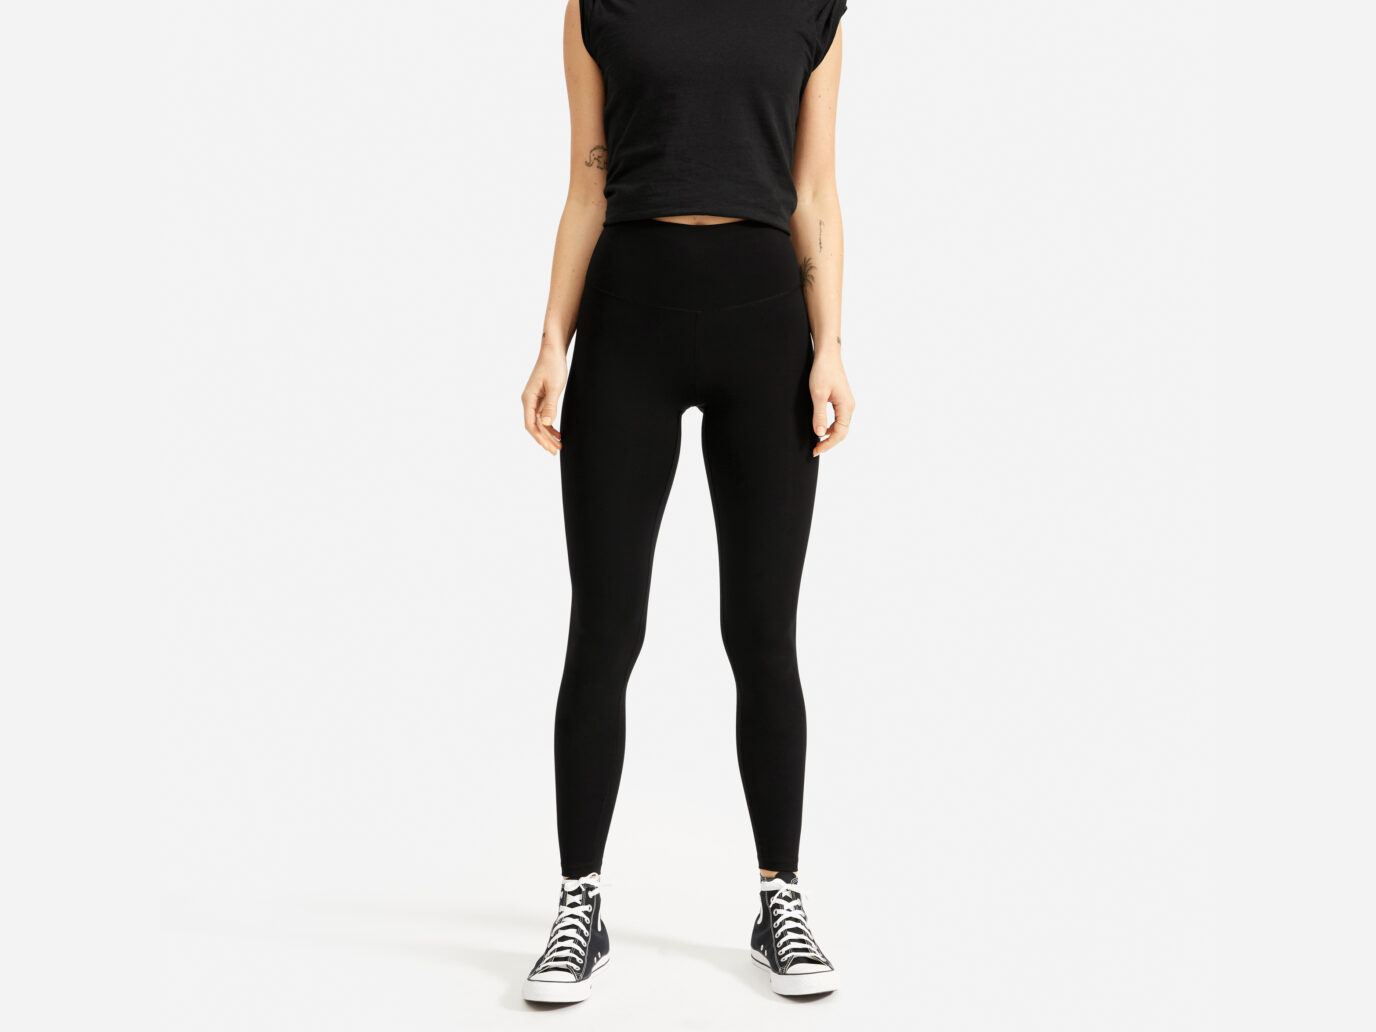 Everlane Just Launched New Leggings: Our Review - Jetsetter